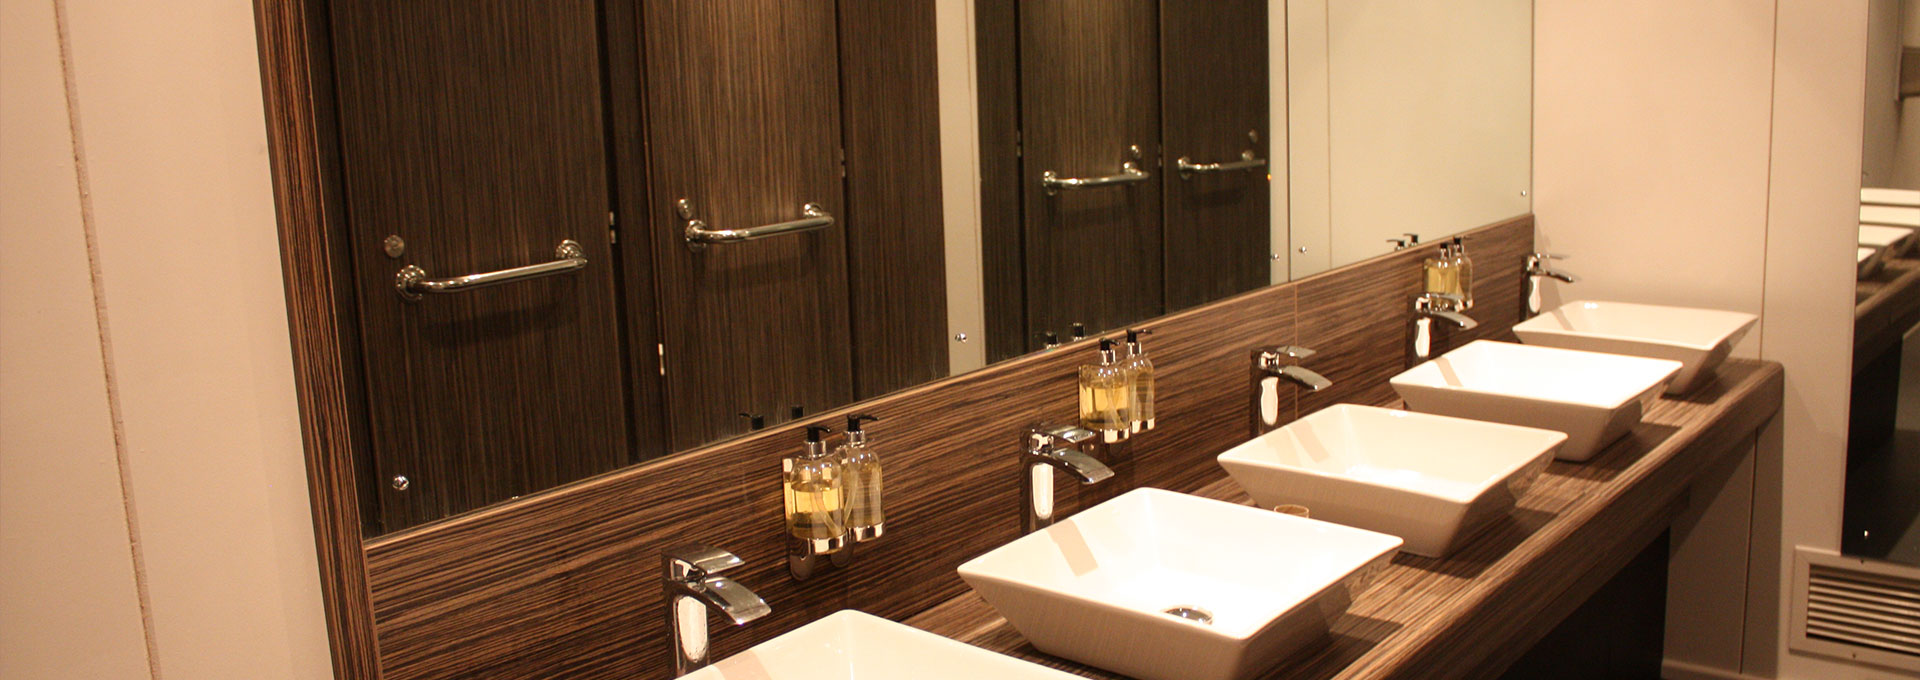 Commercial - Office & Retail washrooms